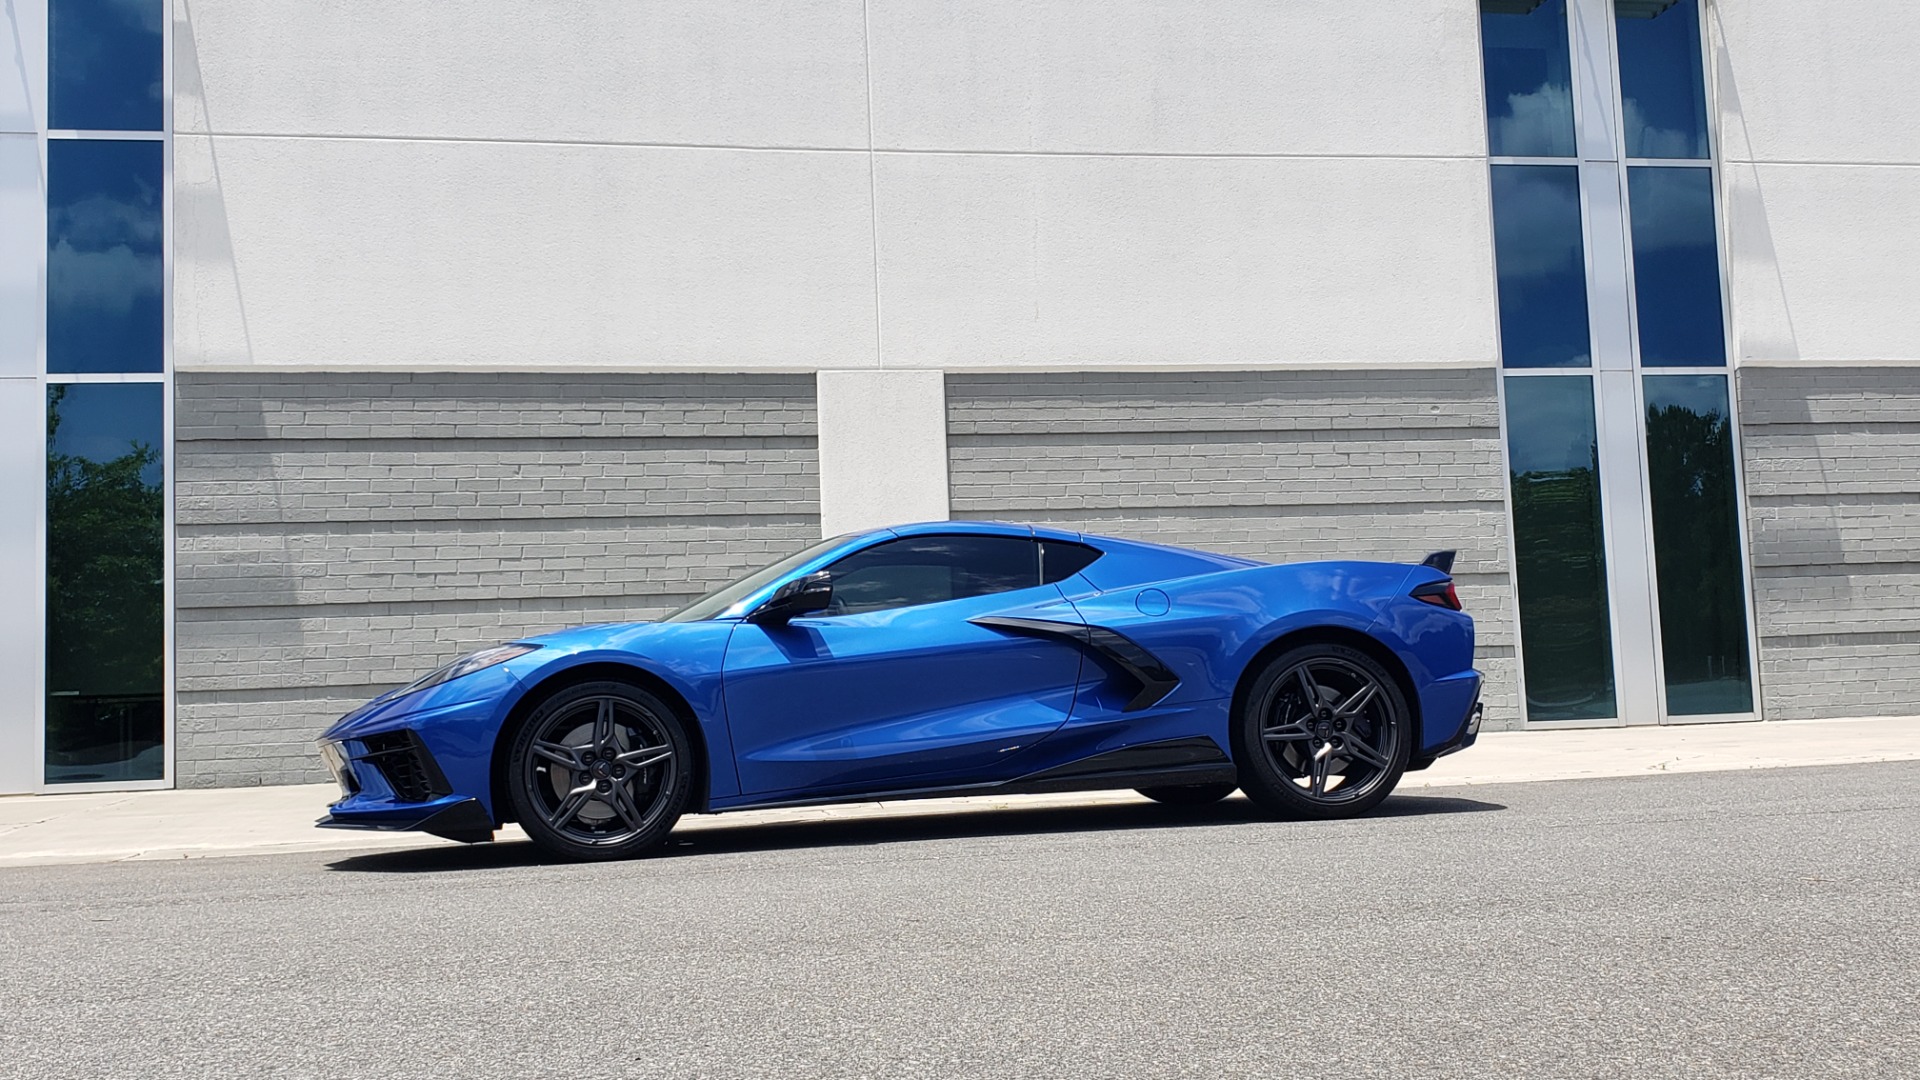 Used 2020 Chevrolet CORVETTE C8 STINGRAY COUPE 2LT / PERF & Z51 PKG / NAV / BOSE / 8-SPD AUTO / REARVIEW for sale Sold at Formula Imports in Charlotte NC 28227 4